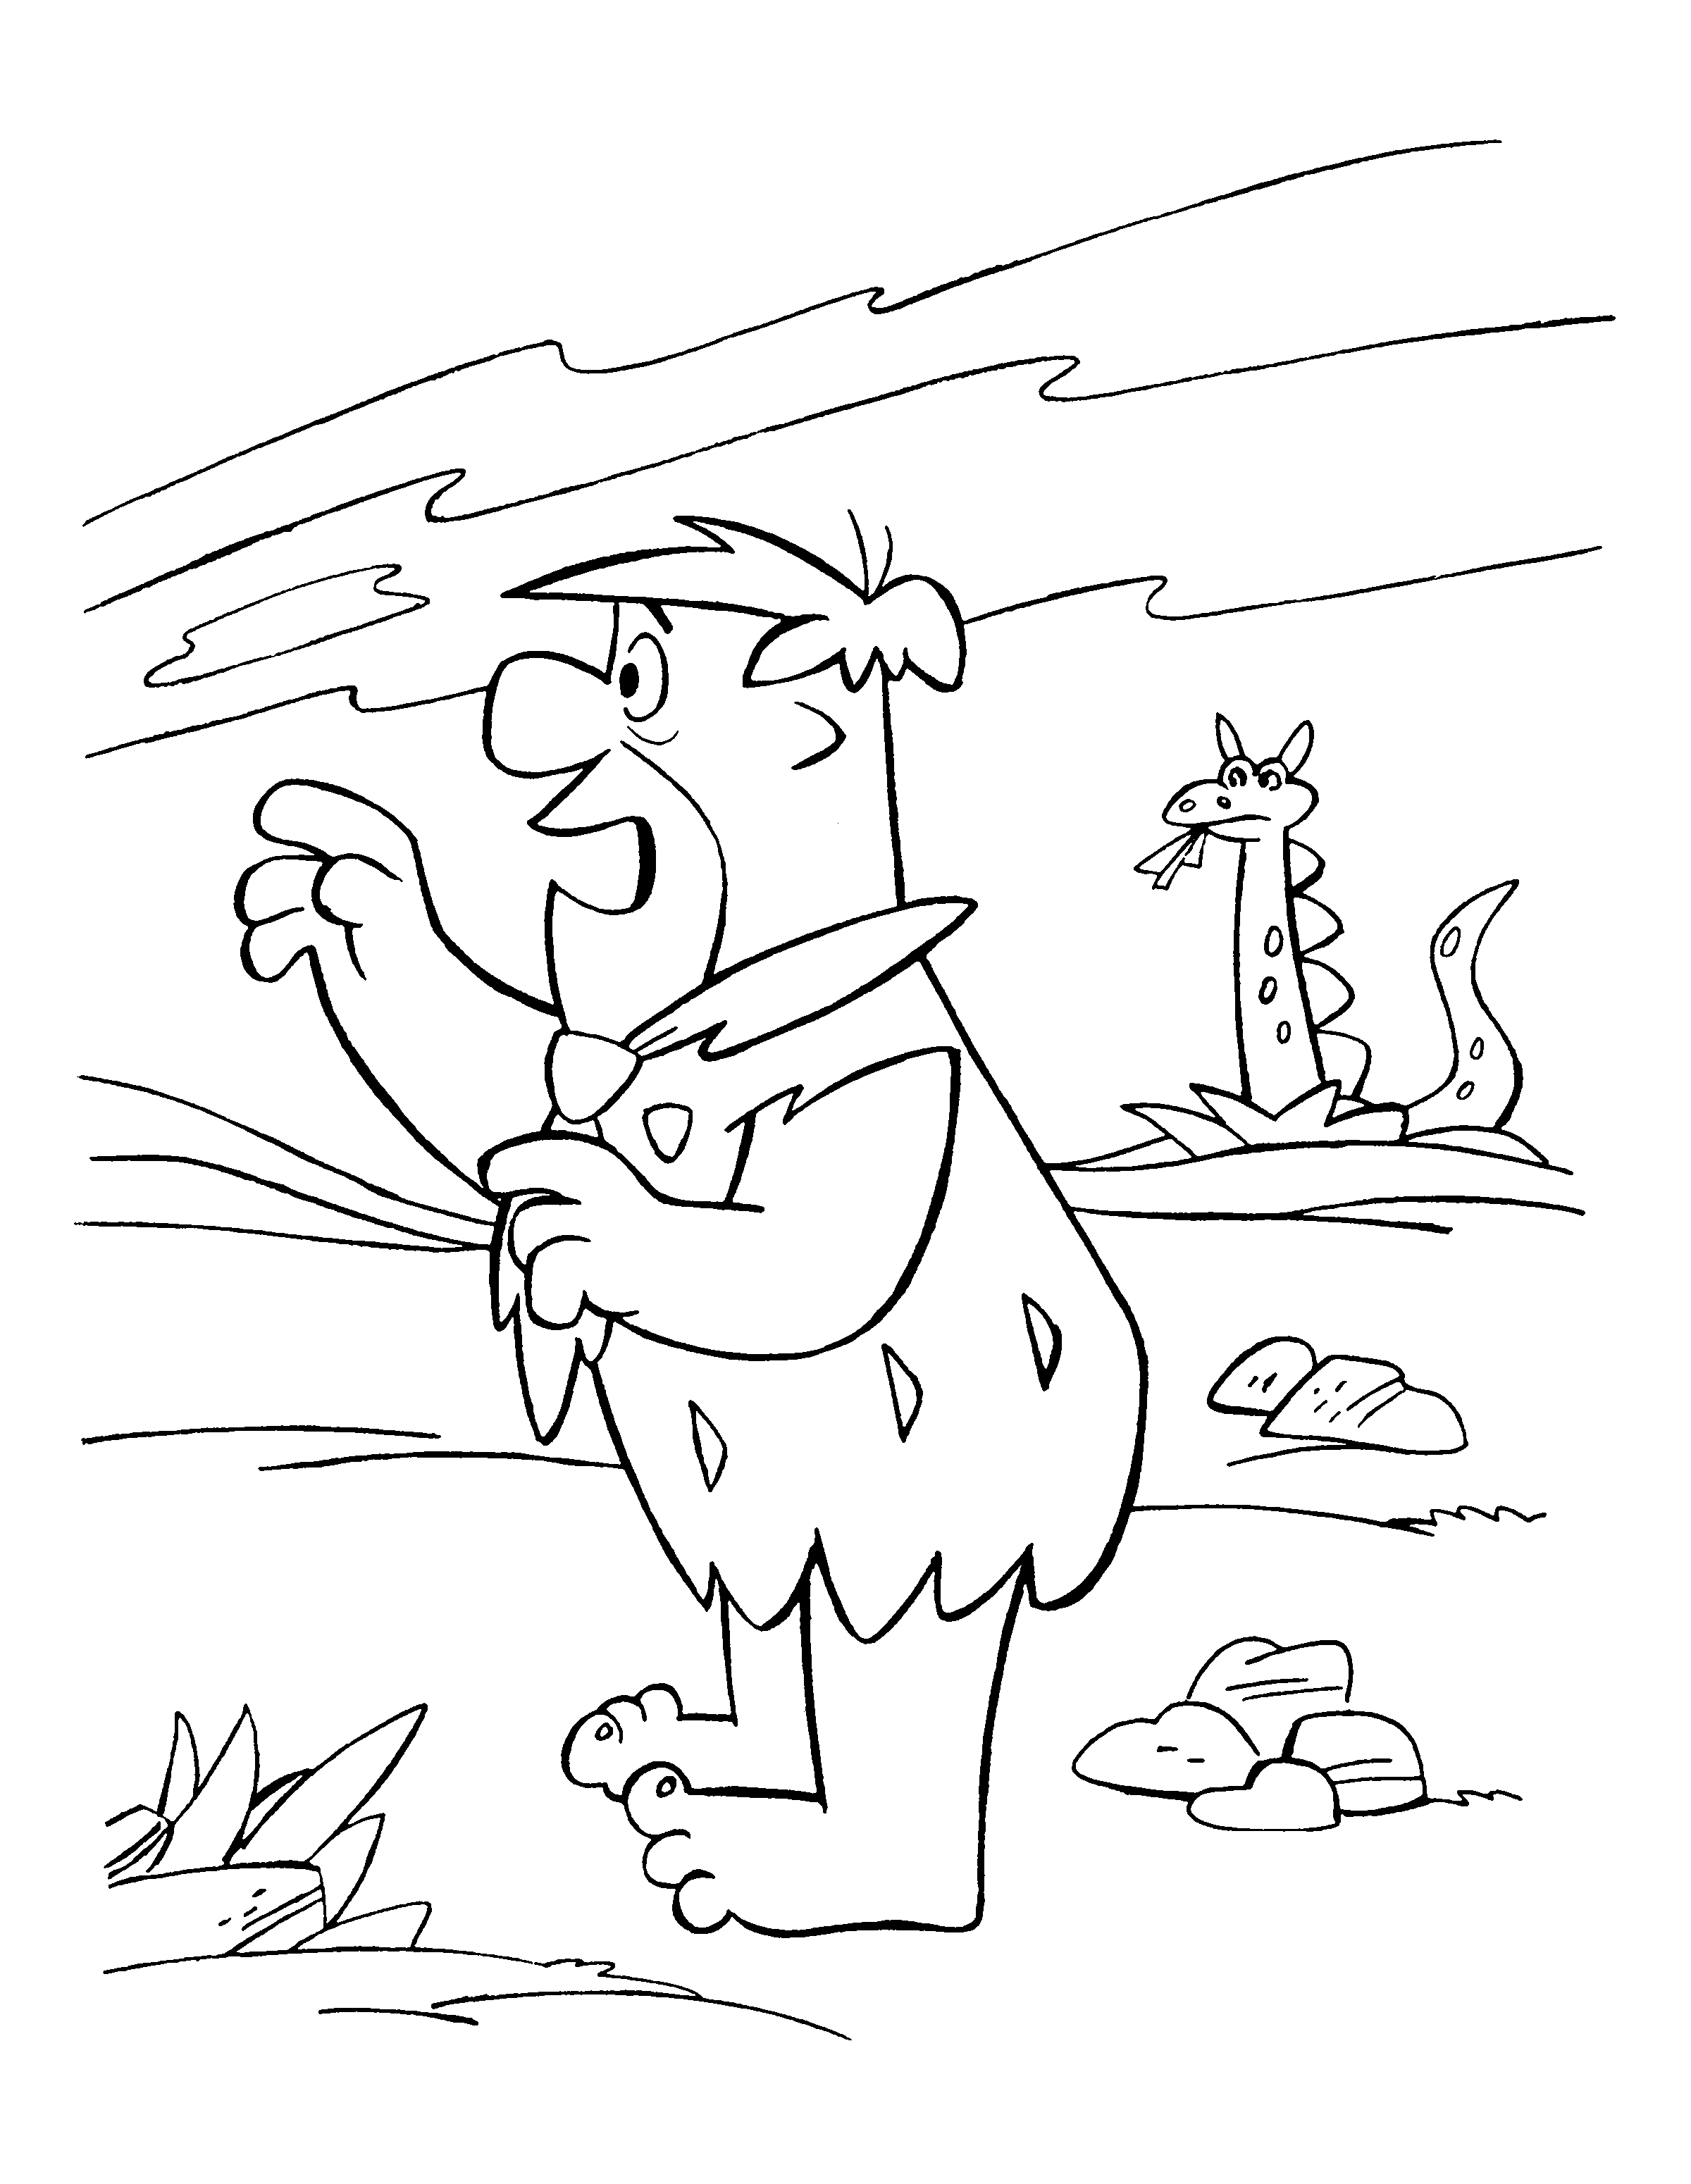 animated-coloring-pages-flintstones-image-0028